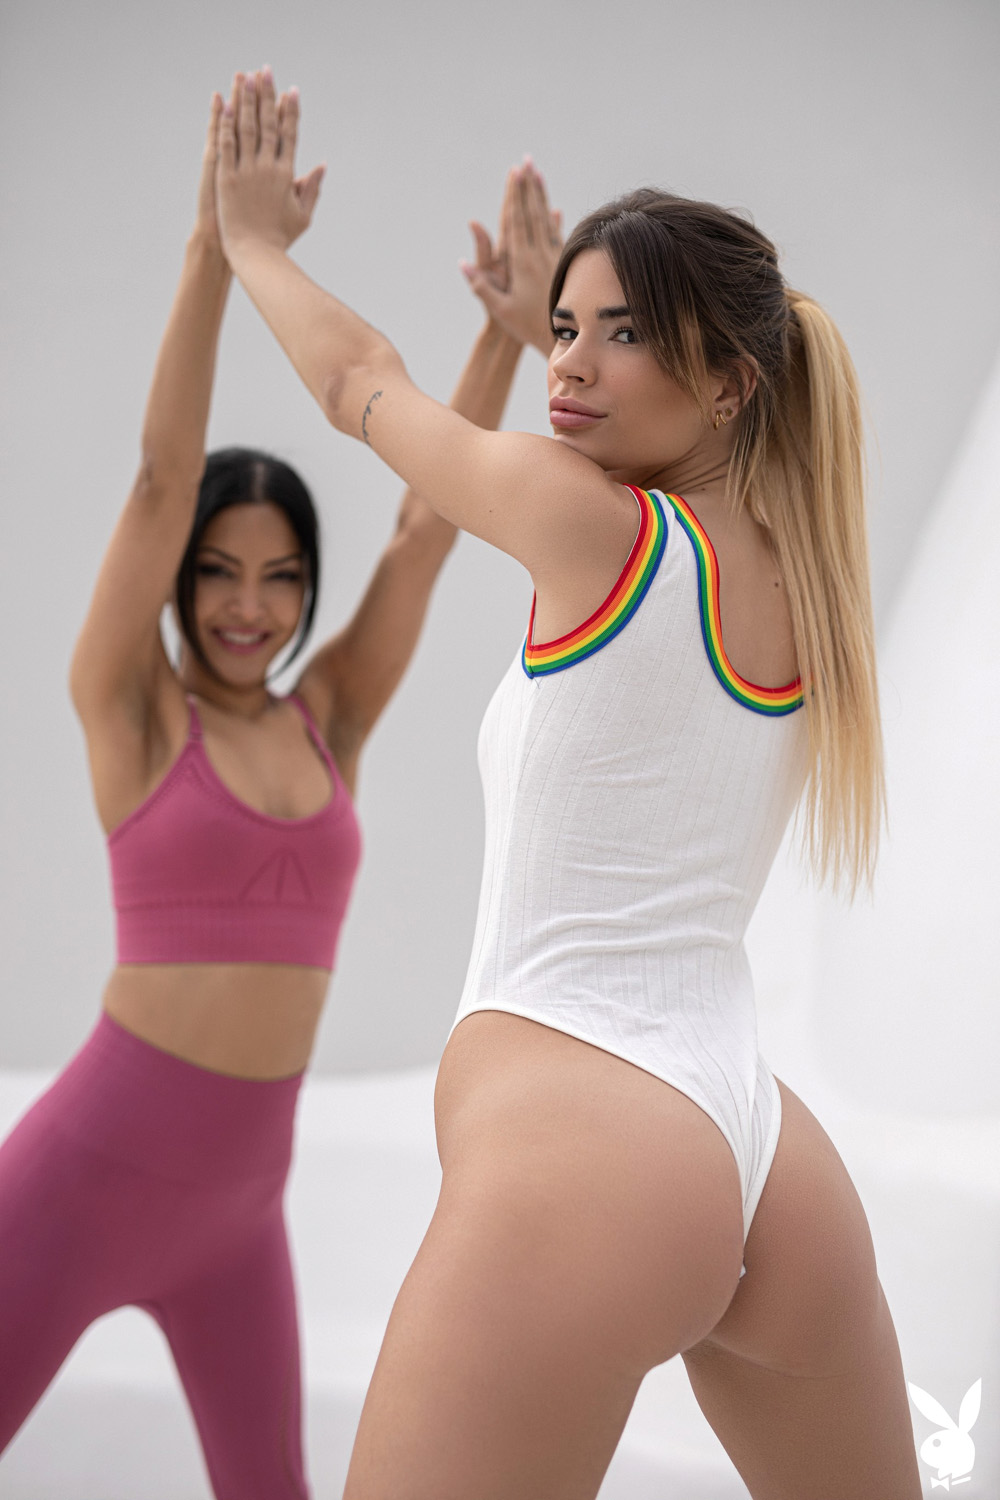 Chloe Rose and Lorena Hidalgo stretching in this supersexy workout session